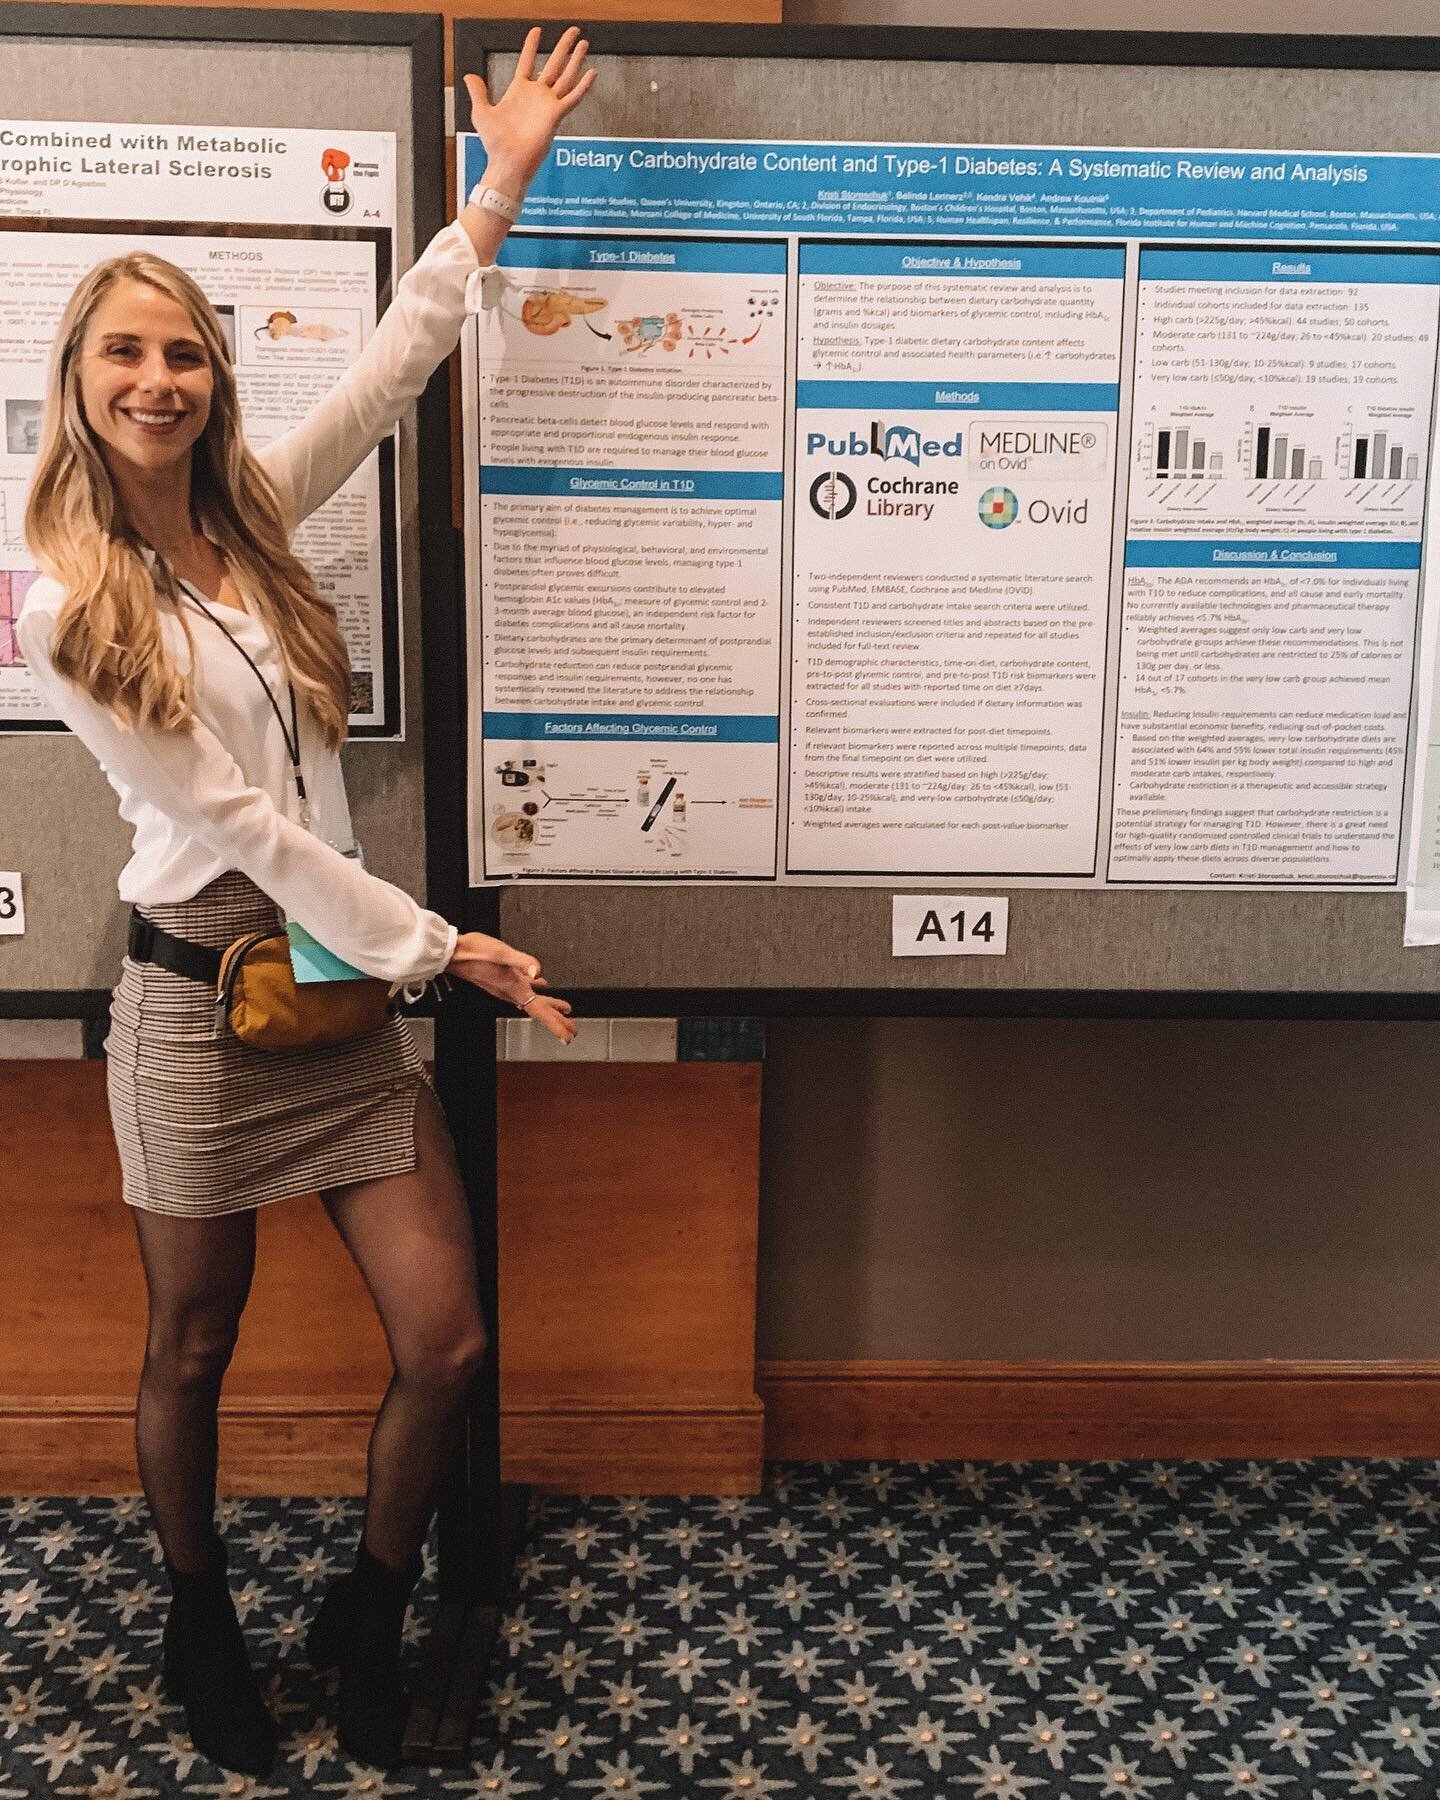 My science stuff 🤗 @metabolichealthsummit 

Preliminary findings from a huge and very long ongoing project suggesting a relationship between carbohydrate intake and glycemic control in type-1 diabetics in collab with some AMAZING scientists.